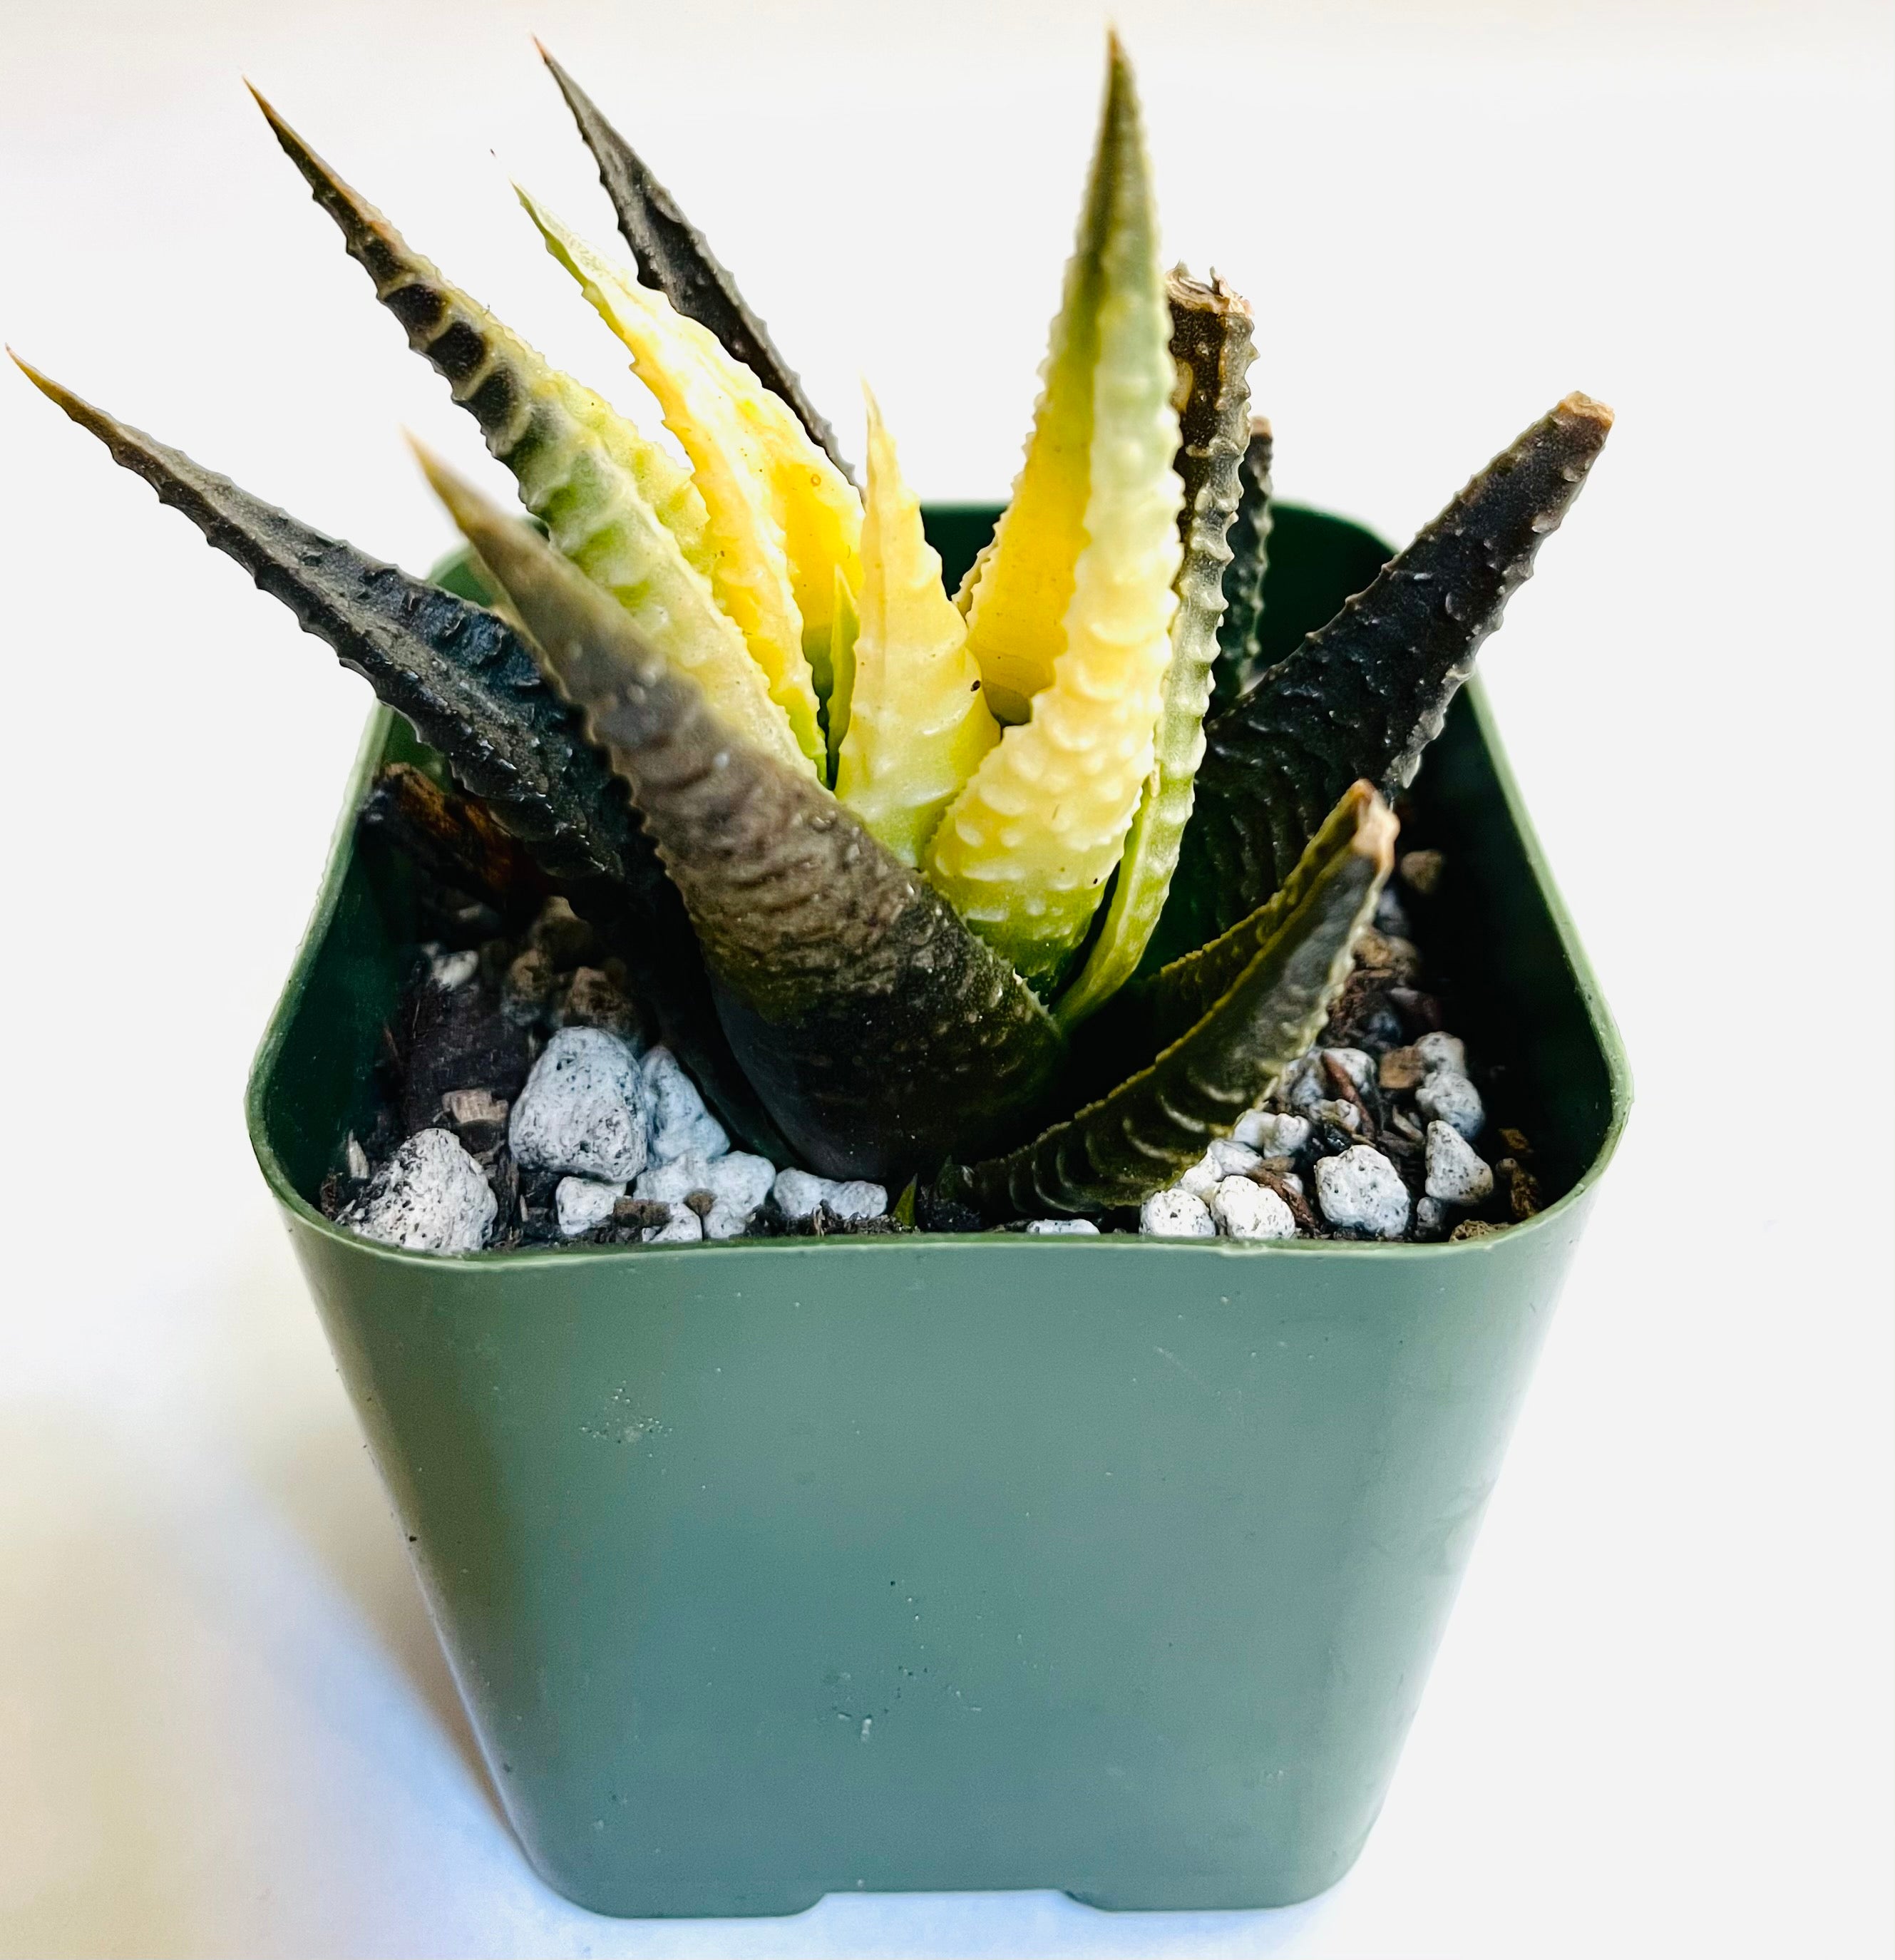 A rosette succulent with pointed leaves, which have horizontal grooves along the leaves. The outer leaves are a deep green that looks almost black, while the inner leaves are a sunny yellow.